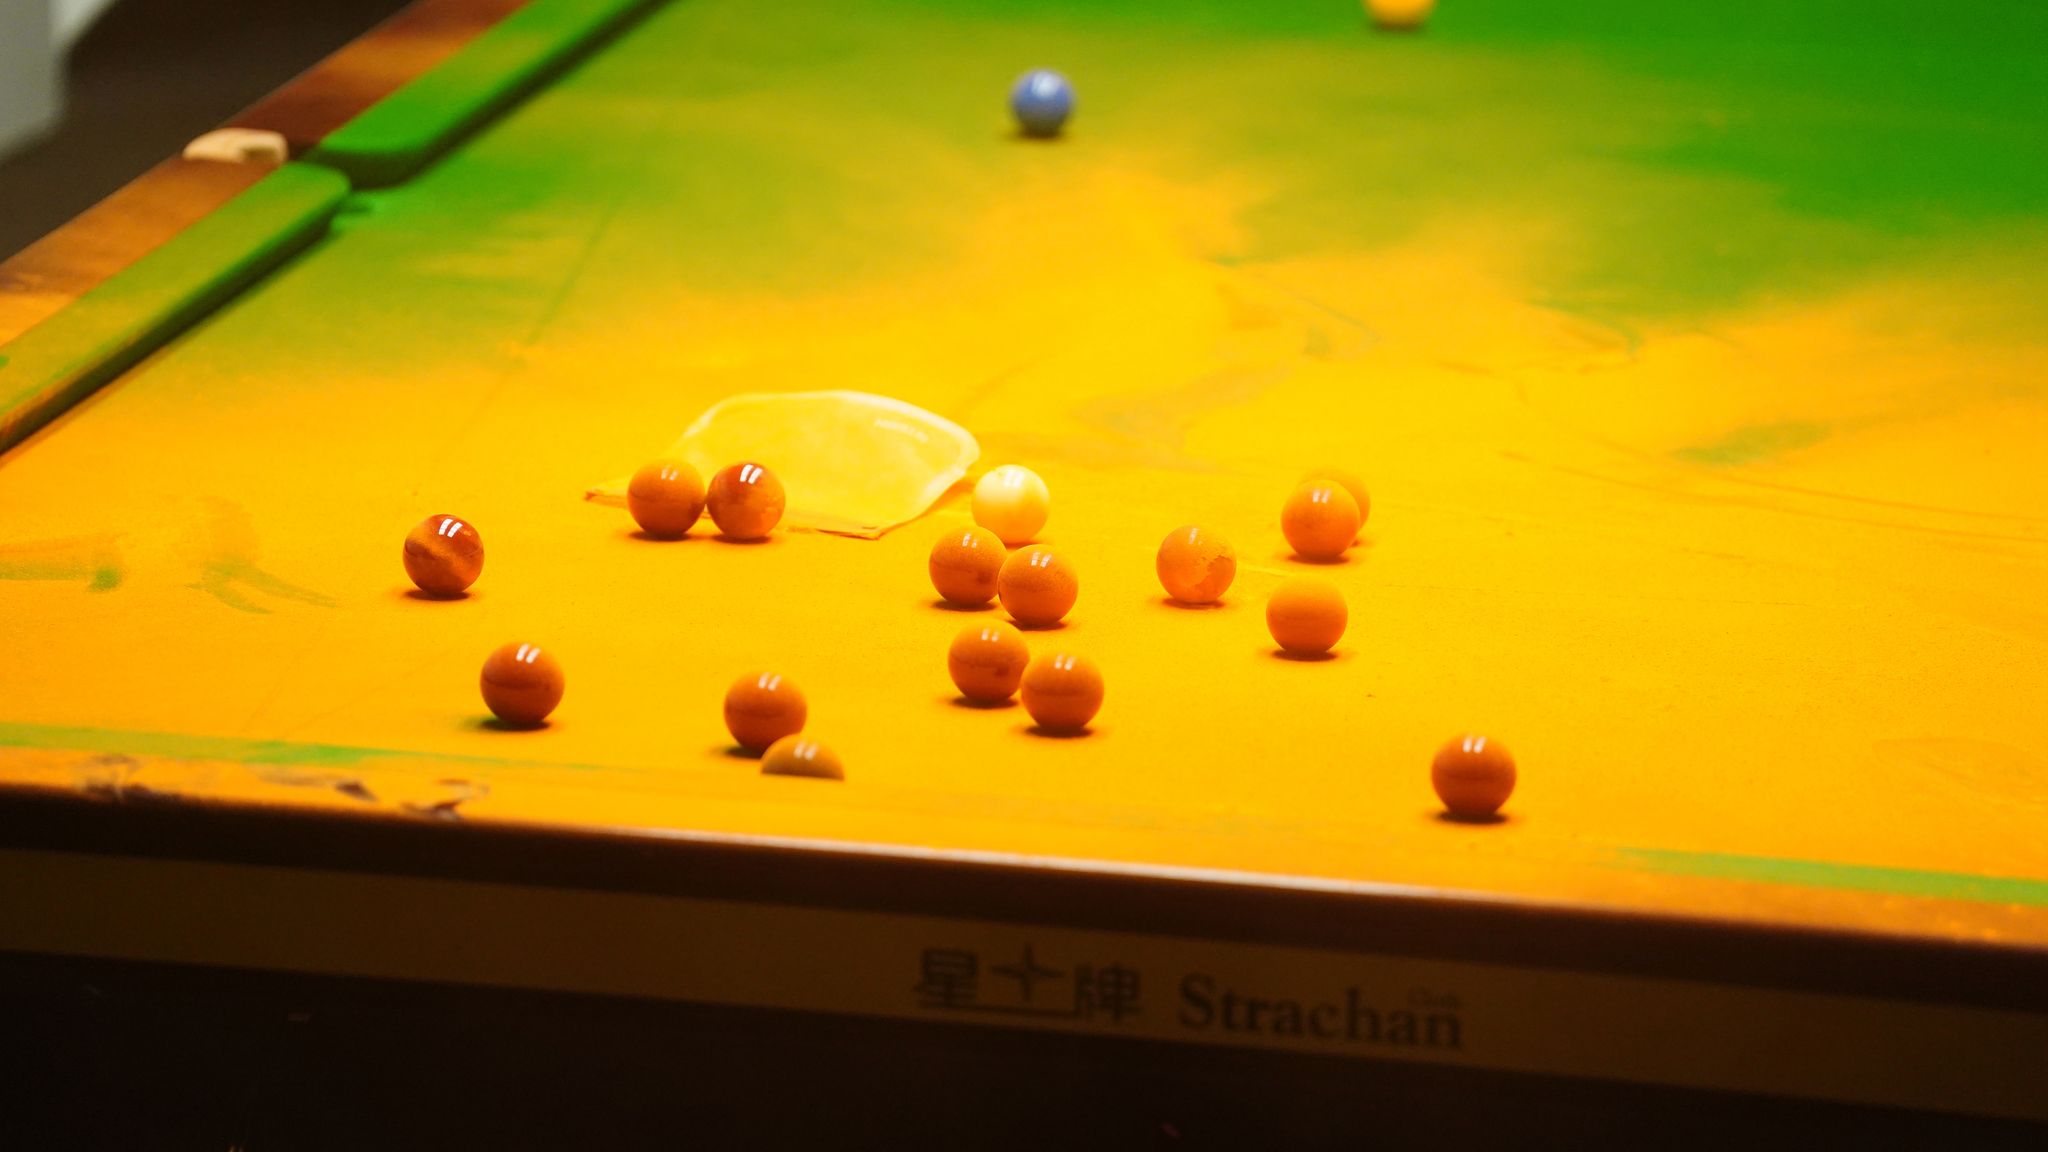 World Snooker Championship Play suspended as protester throws orange substance on table Snooker News Sky Sports